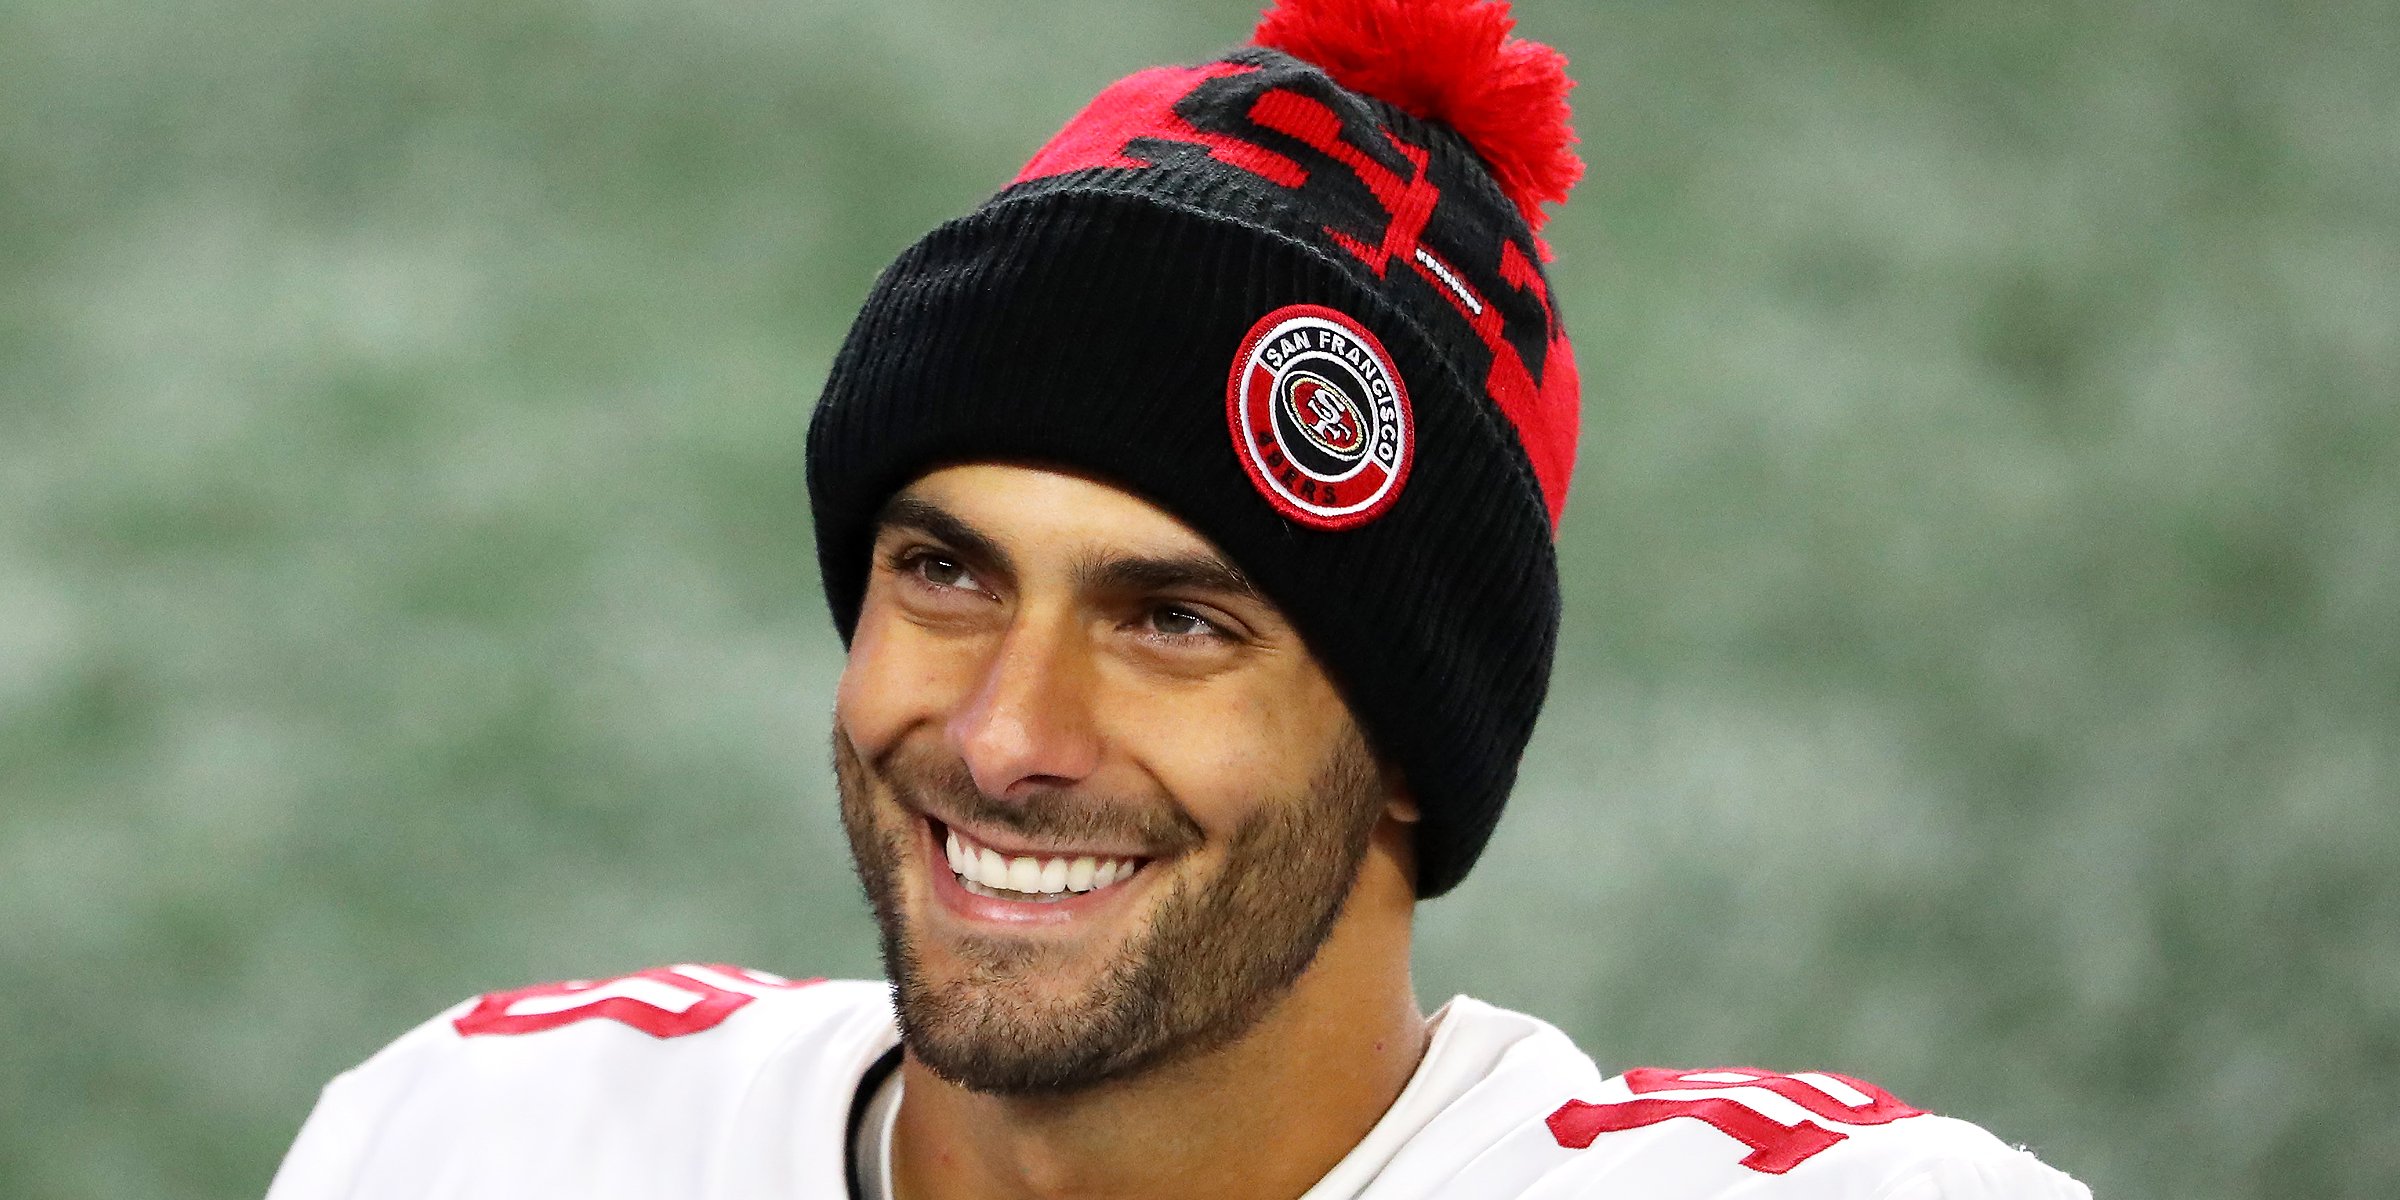 Jimmy Garoppolo | Source: Getty Images